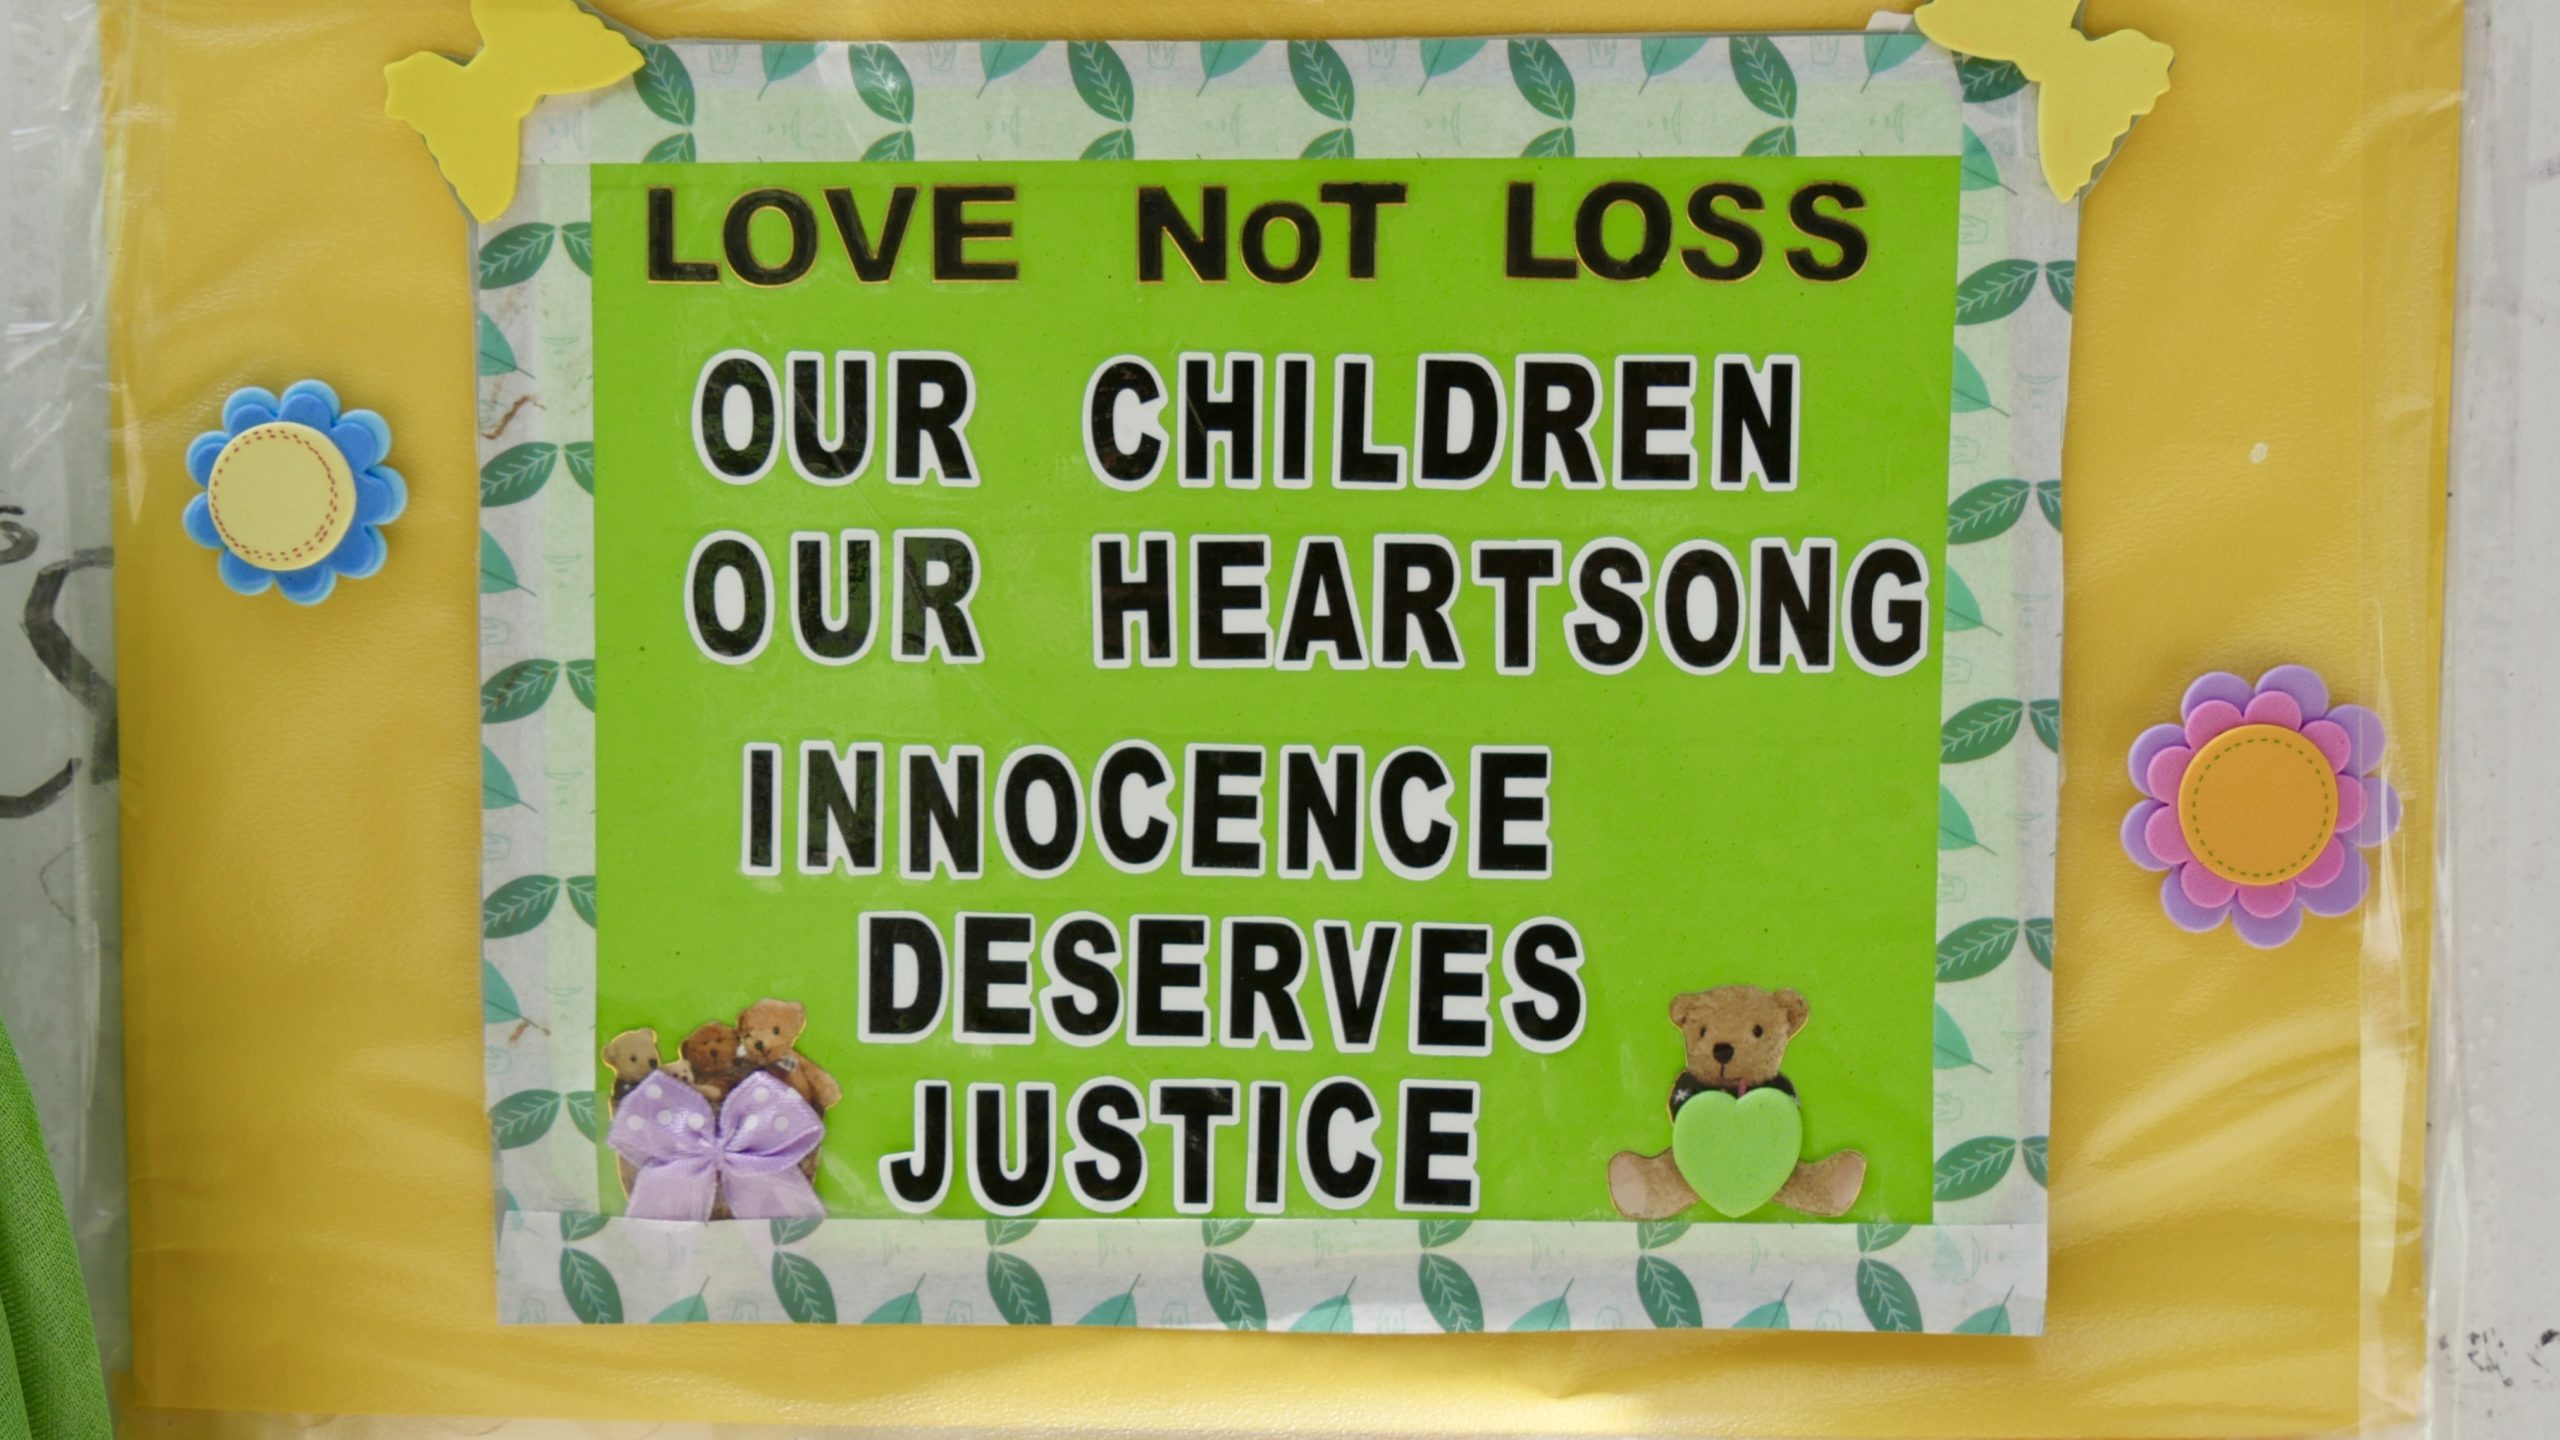 "Innocence deserves justice," this sign acknowledges the 18 children who lost their lives in the grenfell tower fire and calls for action. 